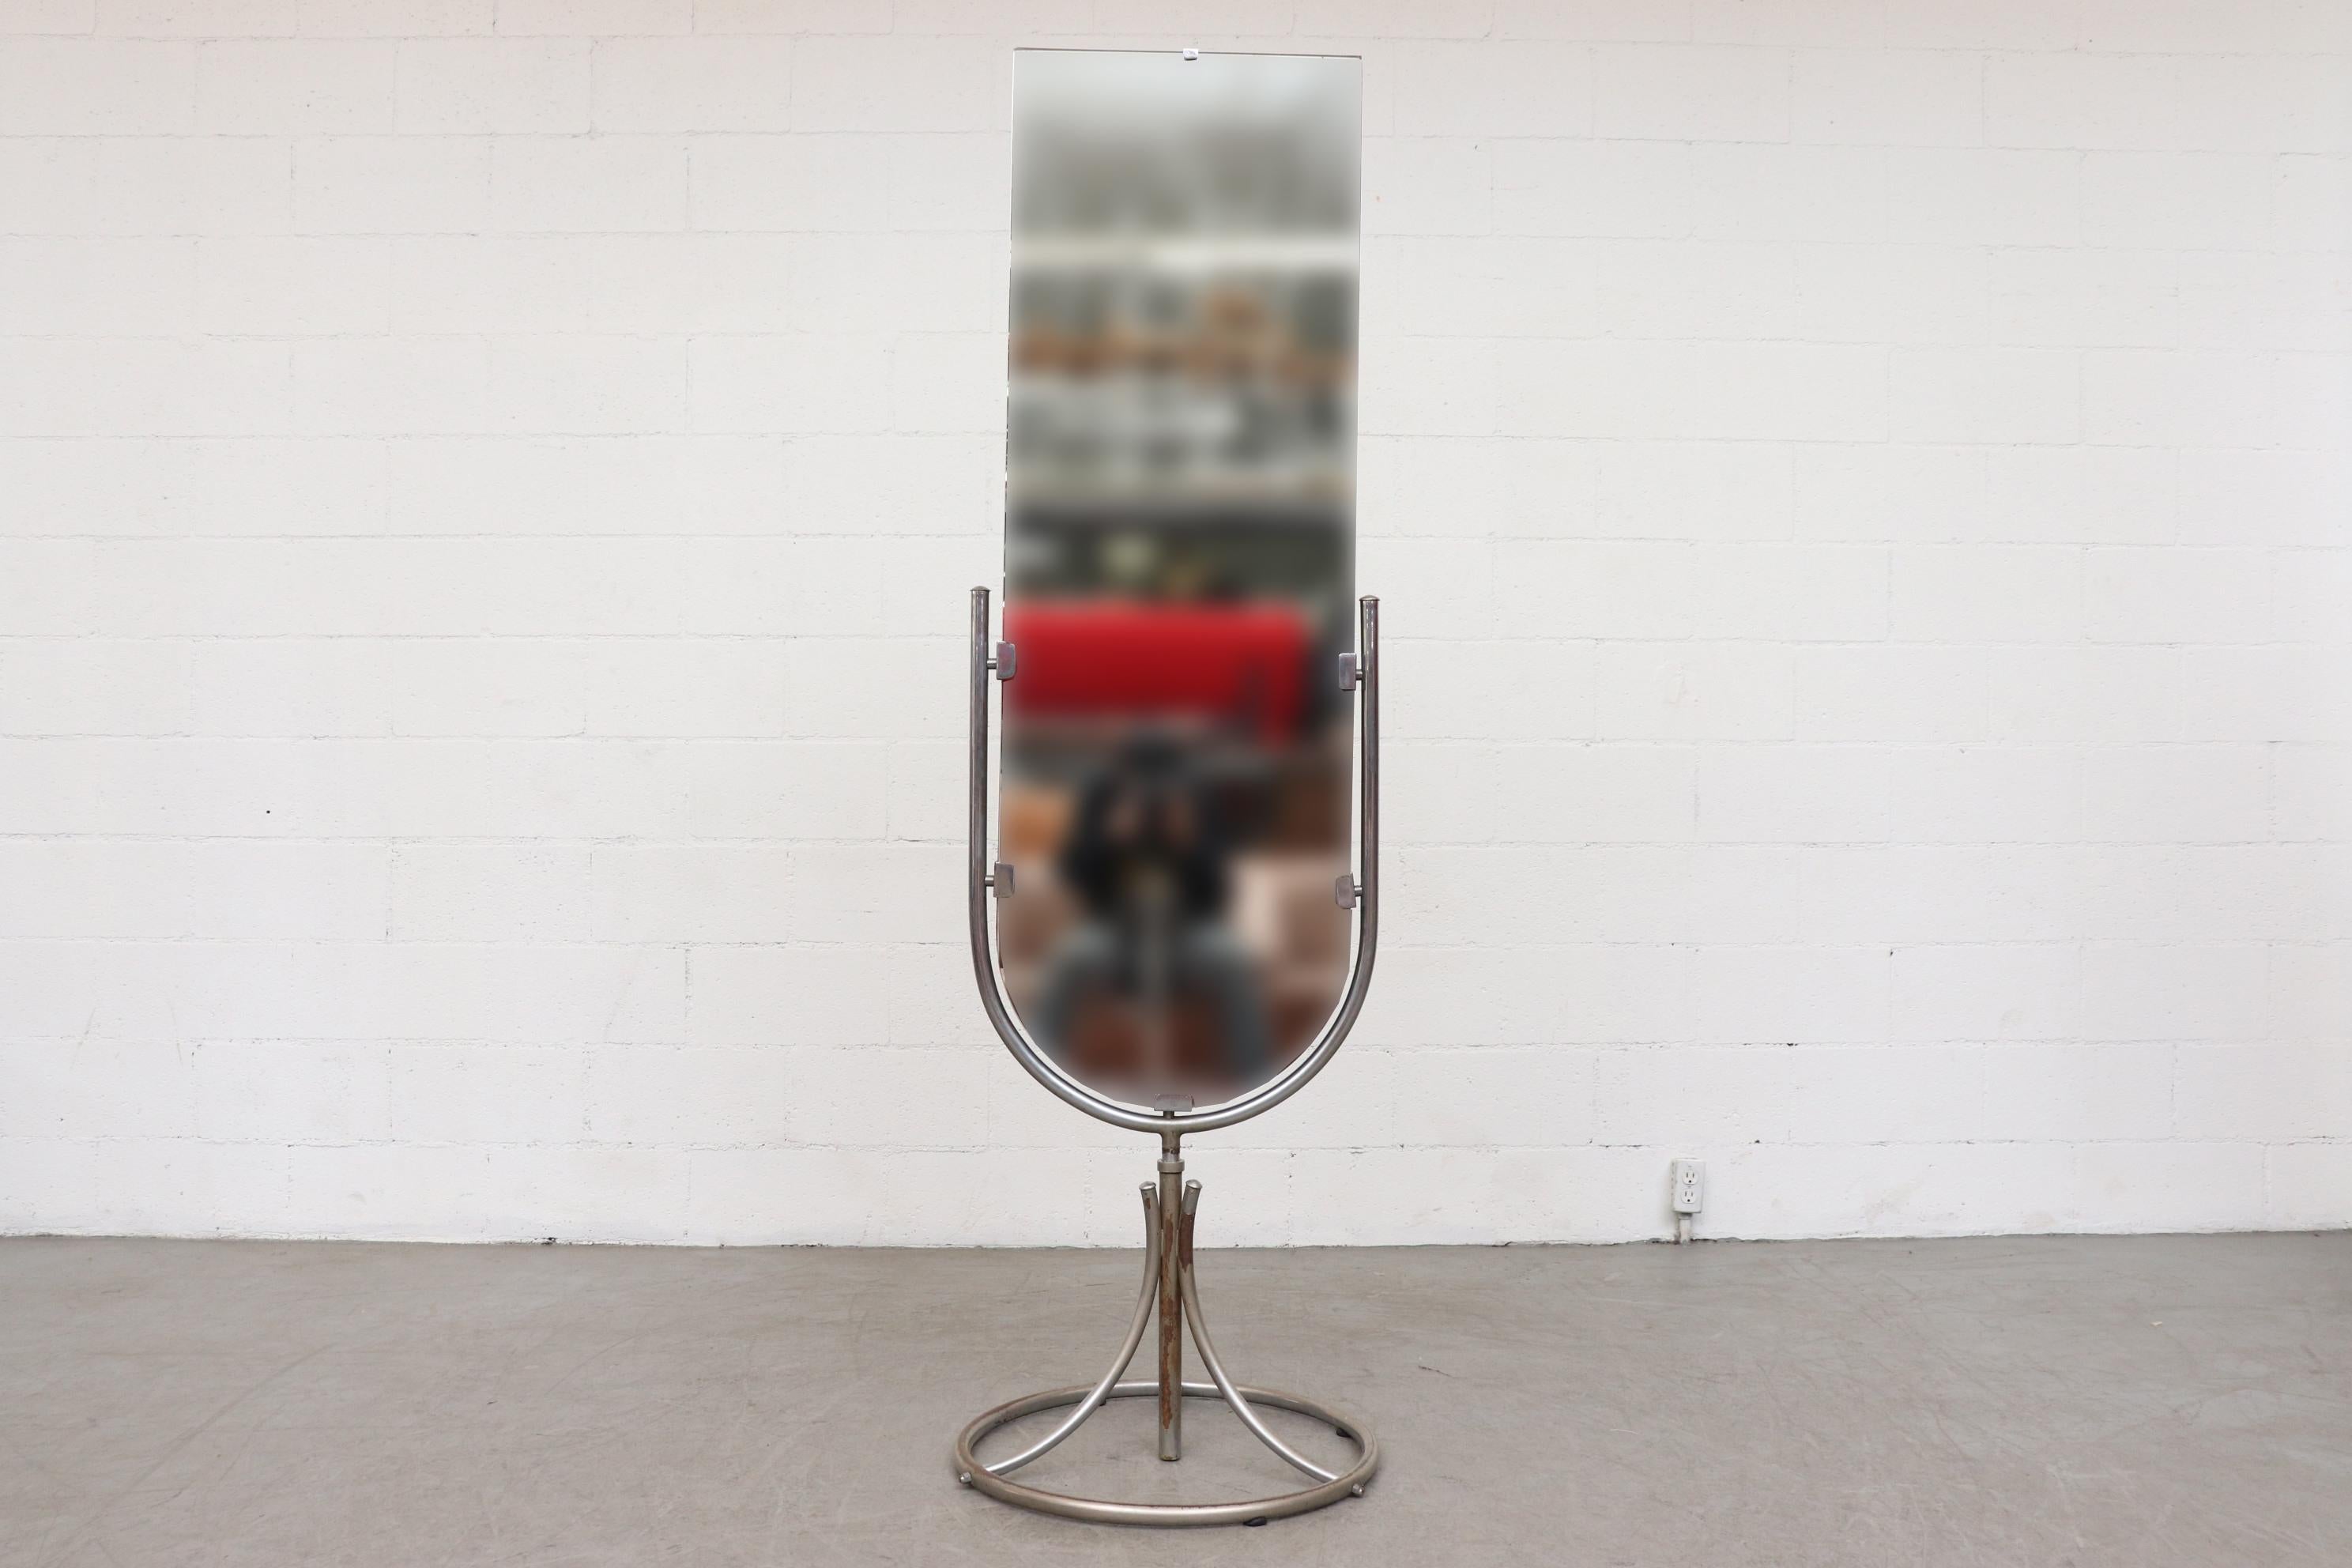 Bauhaus chrome-plated swivel standing double sided mirror with circular base. New made mirrors in original frame with very visible signs of wear, including loss to chrome plating on metal base and visible surface rust. All consistent with age and